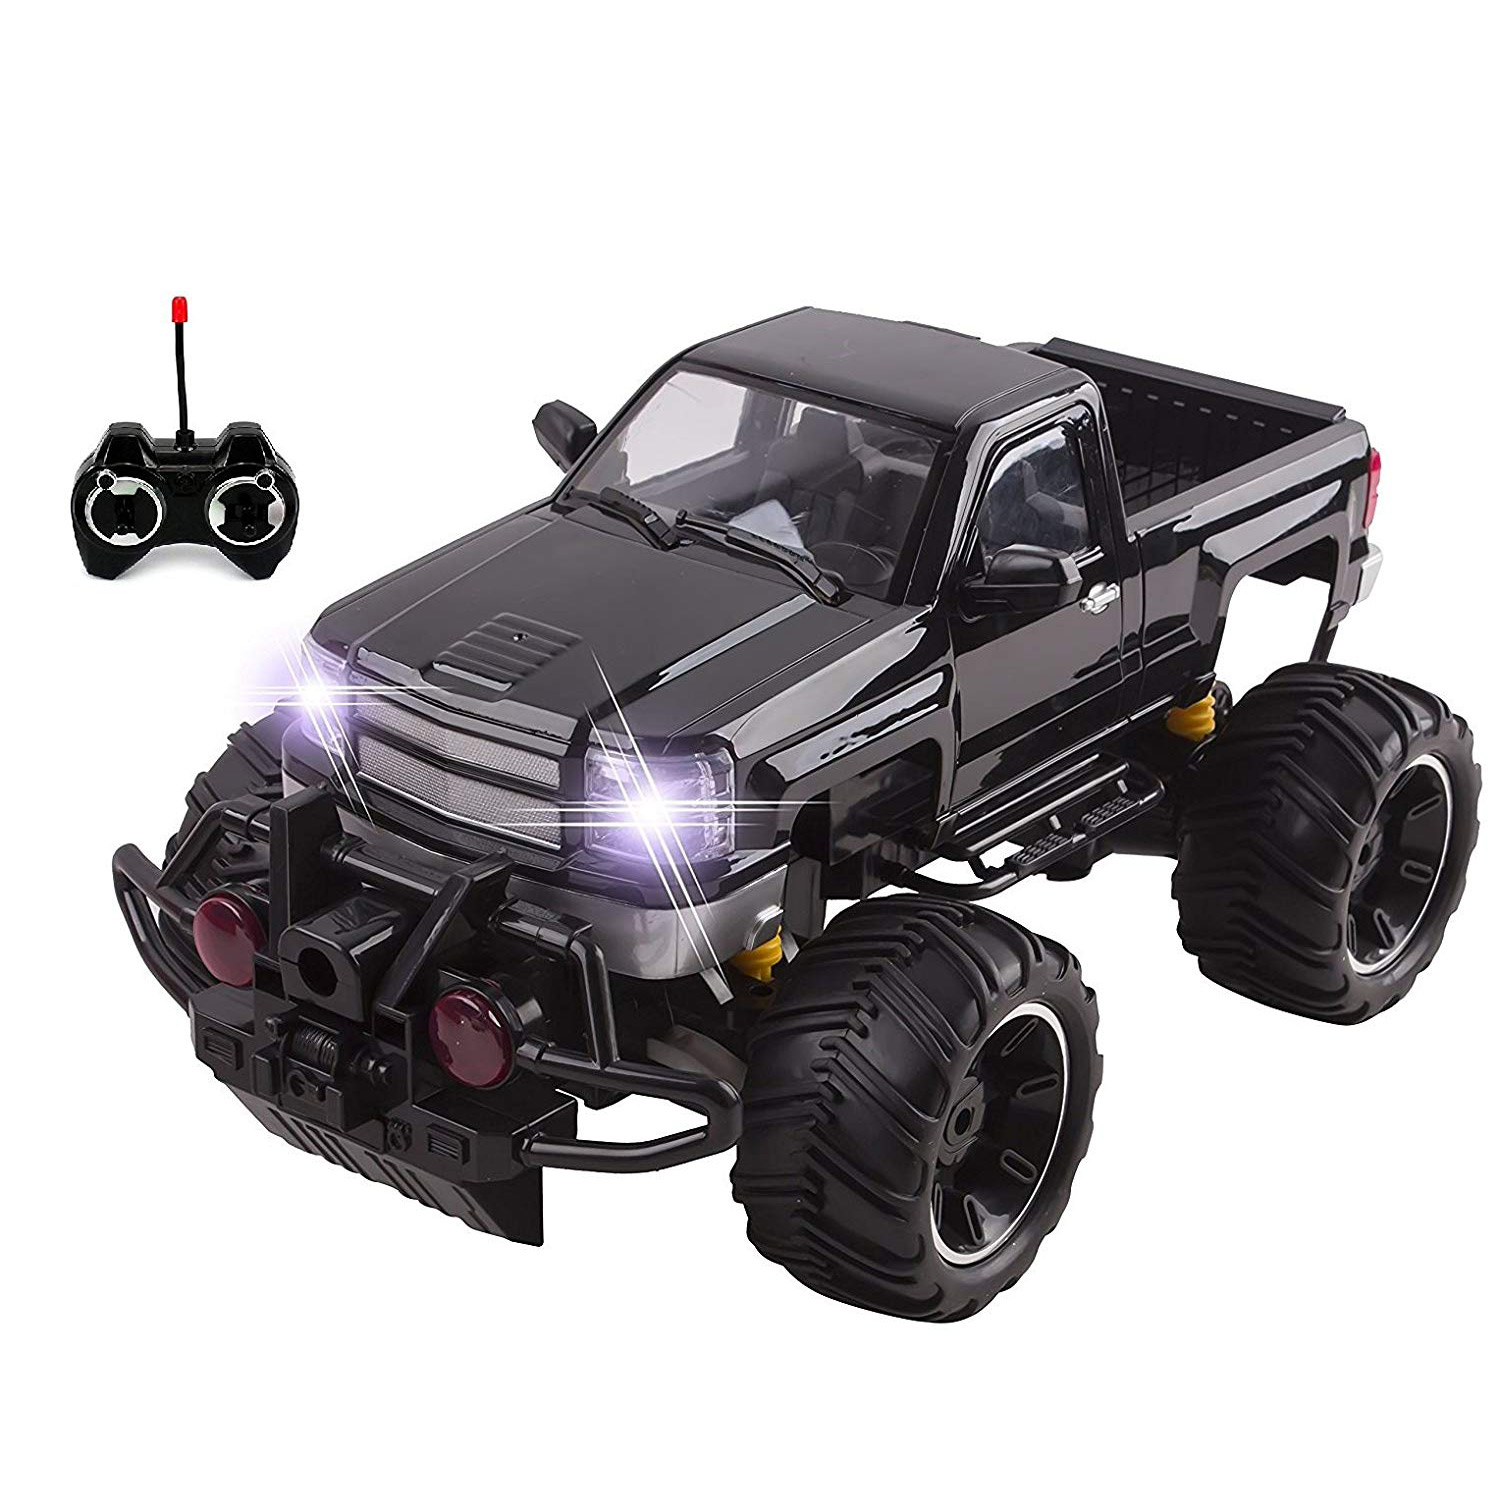 RC Truck Big Wheel Beast Monster Truck Remote Control Doors Opening Car Light Up LED Headlights Ready to Run INCLUDES RECHARGEABLE BATTERY 1:14 Size Off-Road Pick Up Buggy Toy (Black)